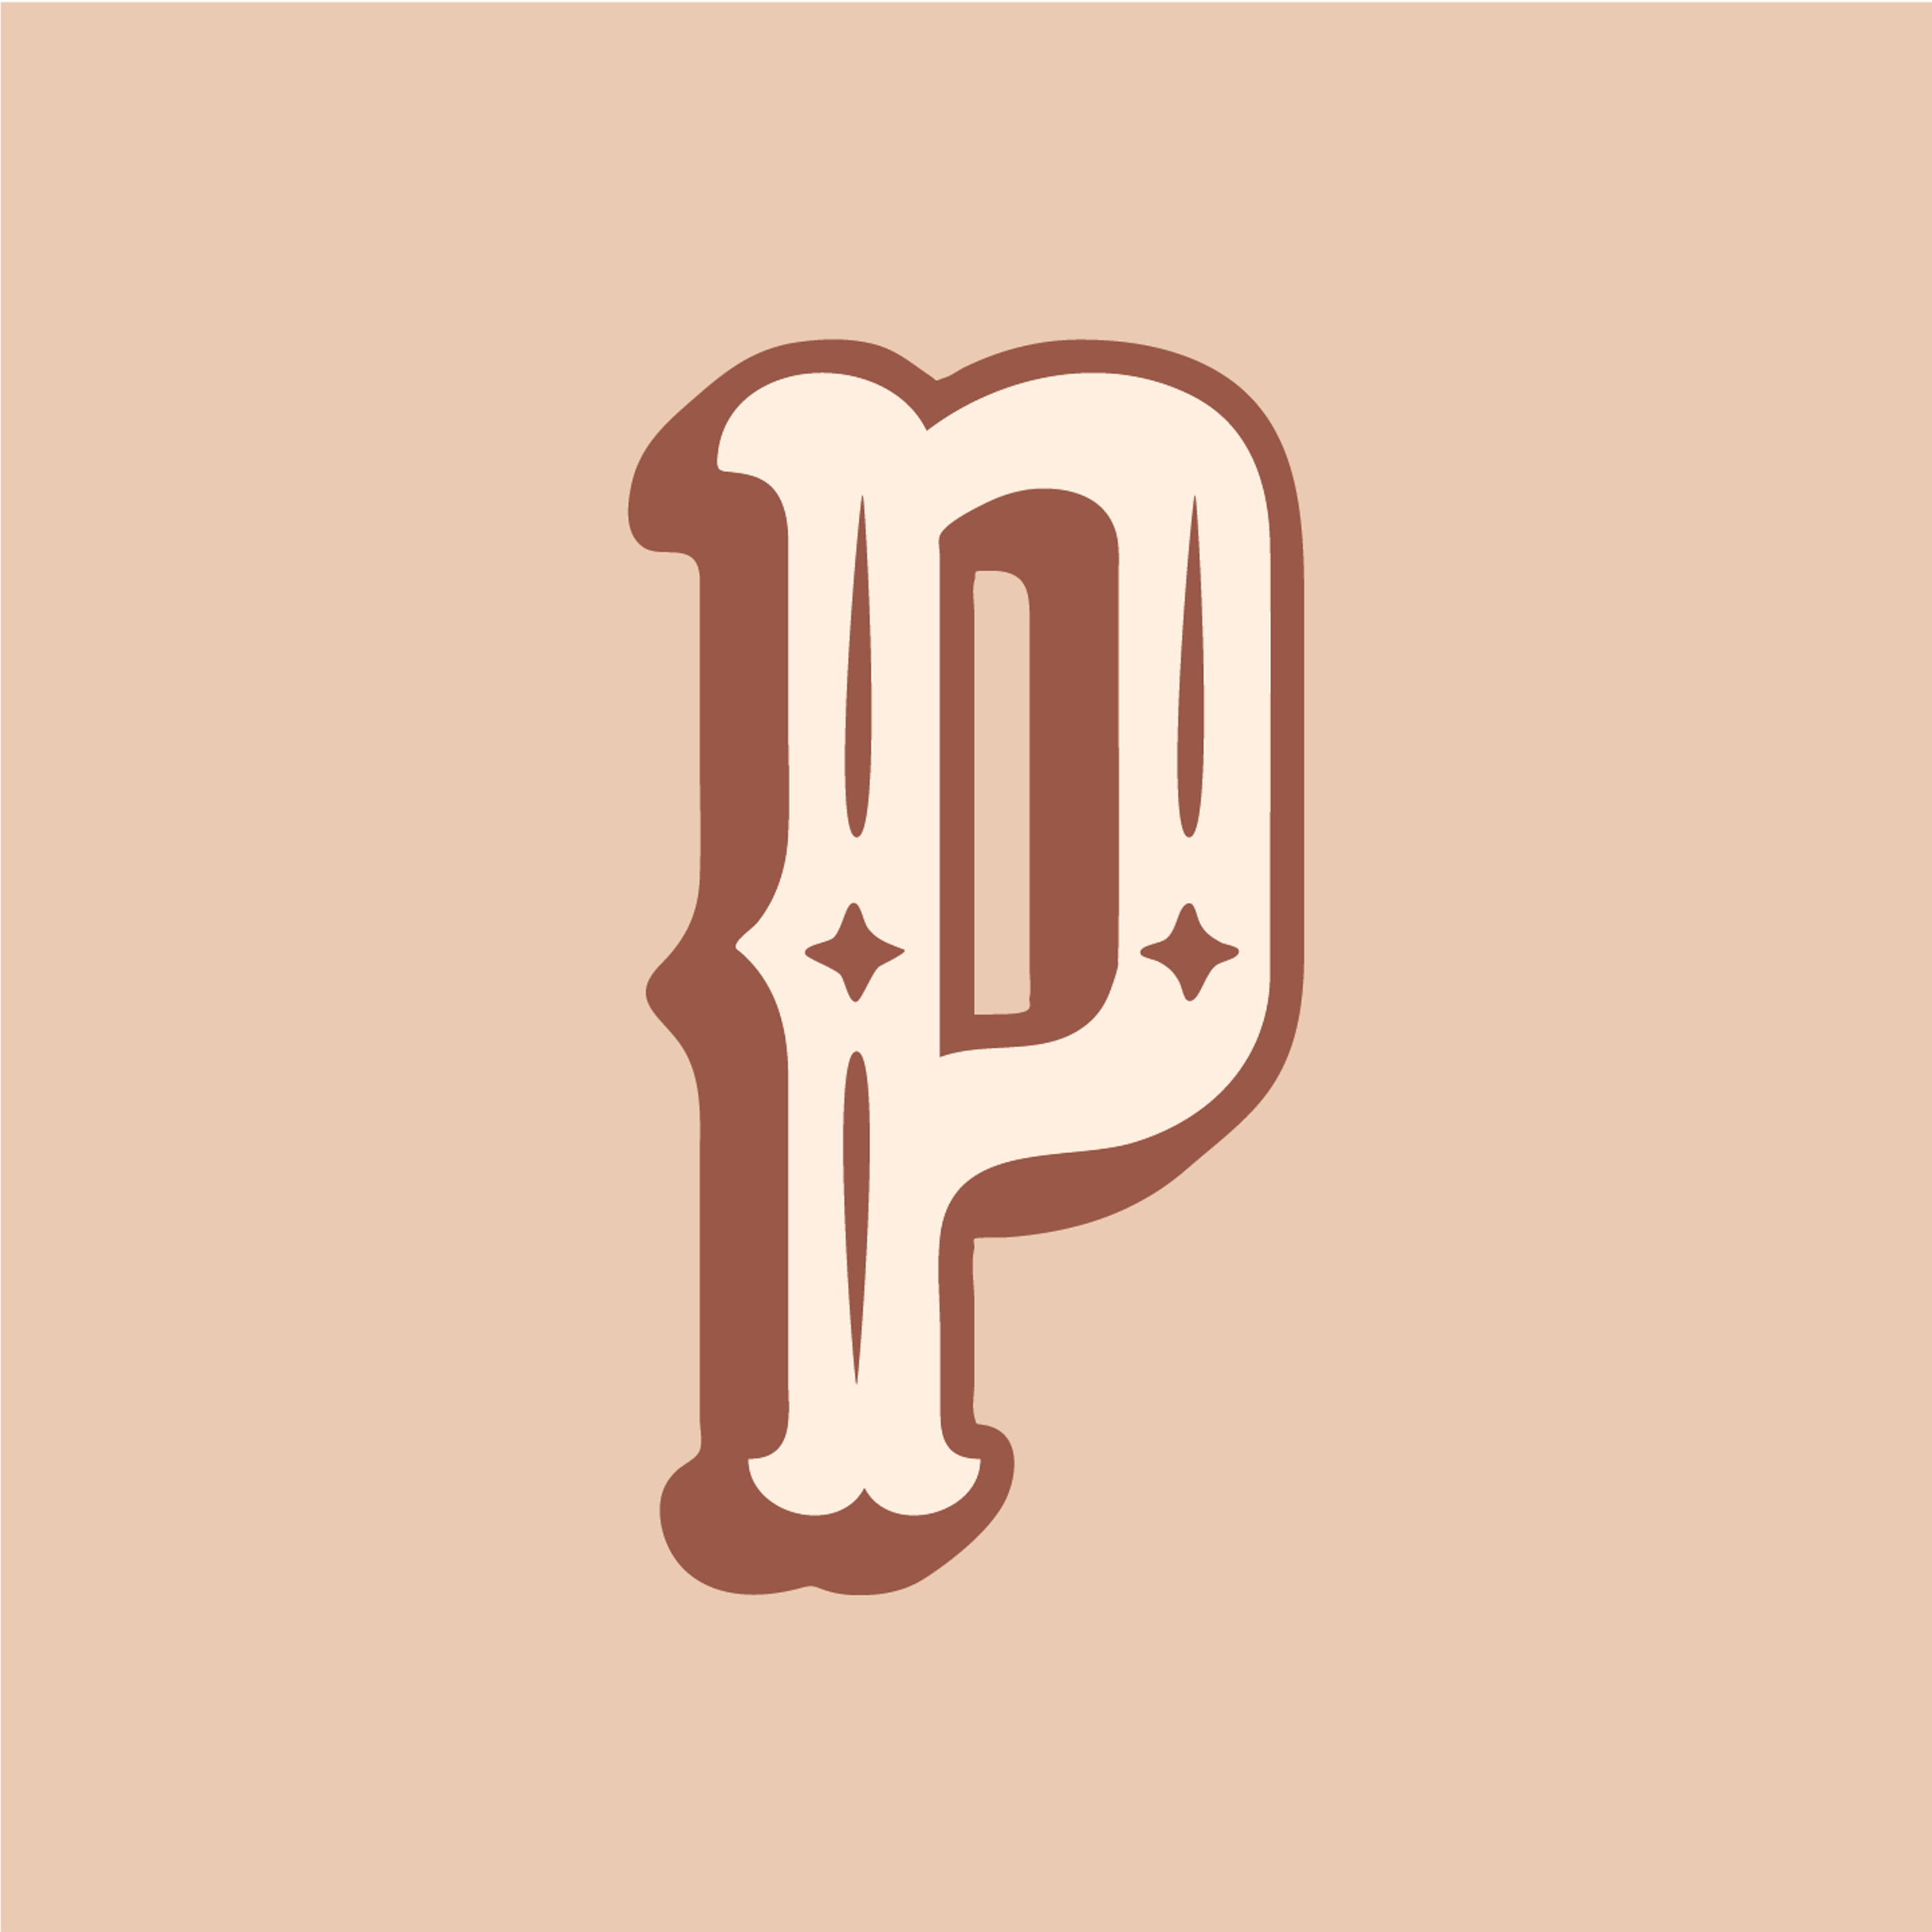 western-style-letter-p-design-theme